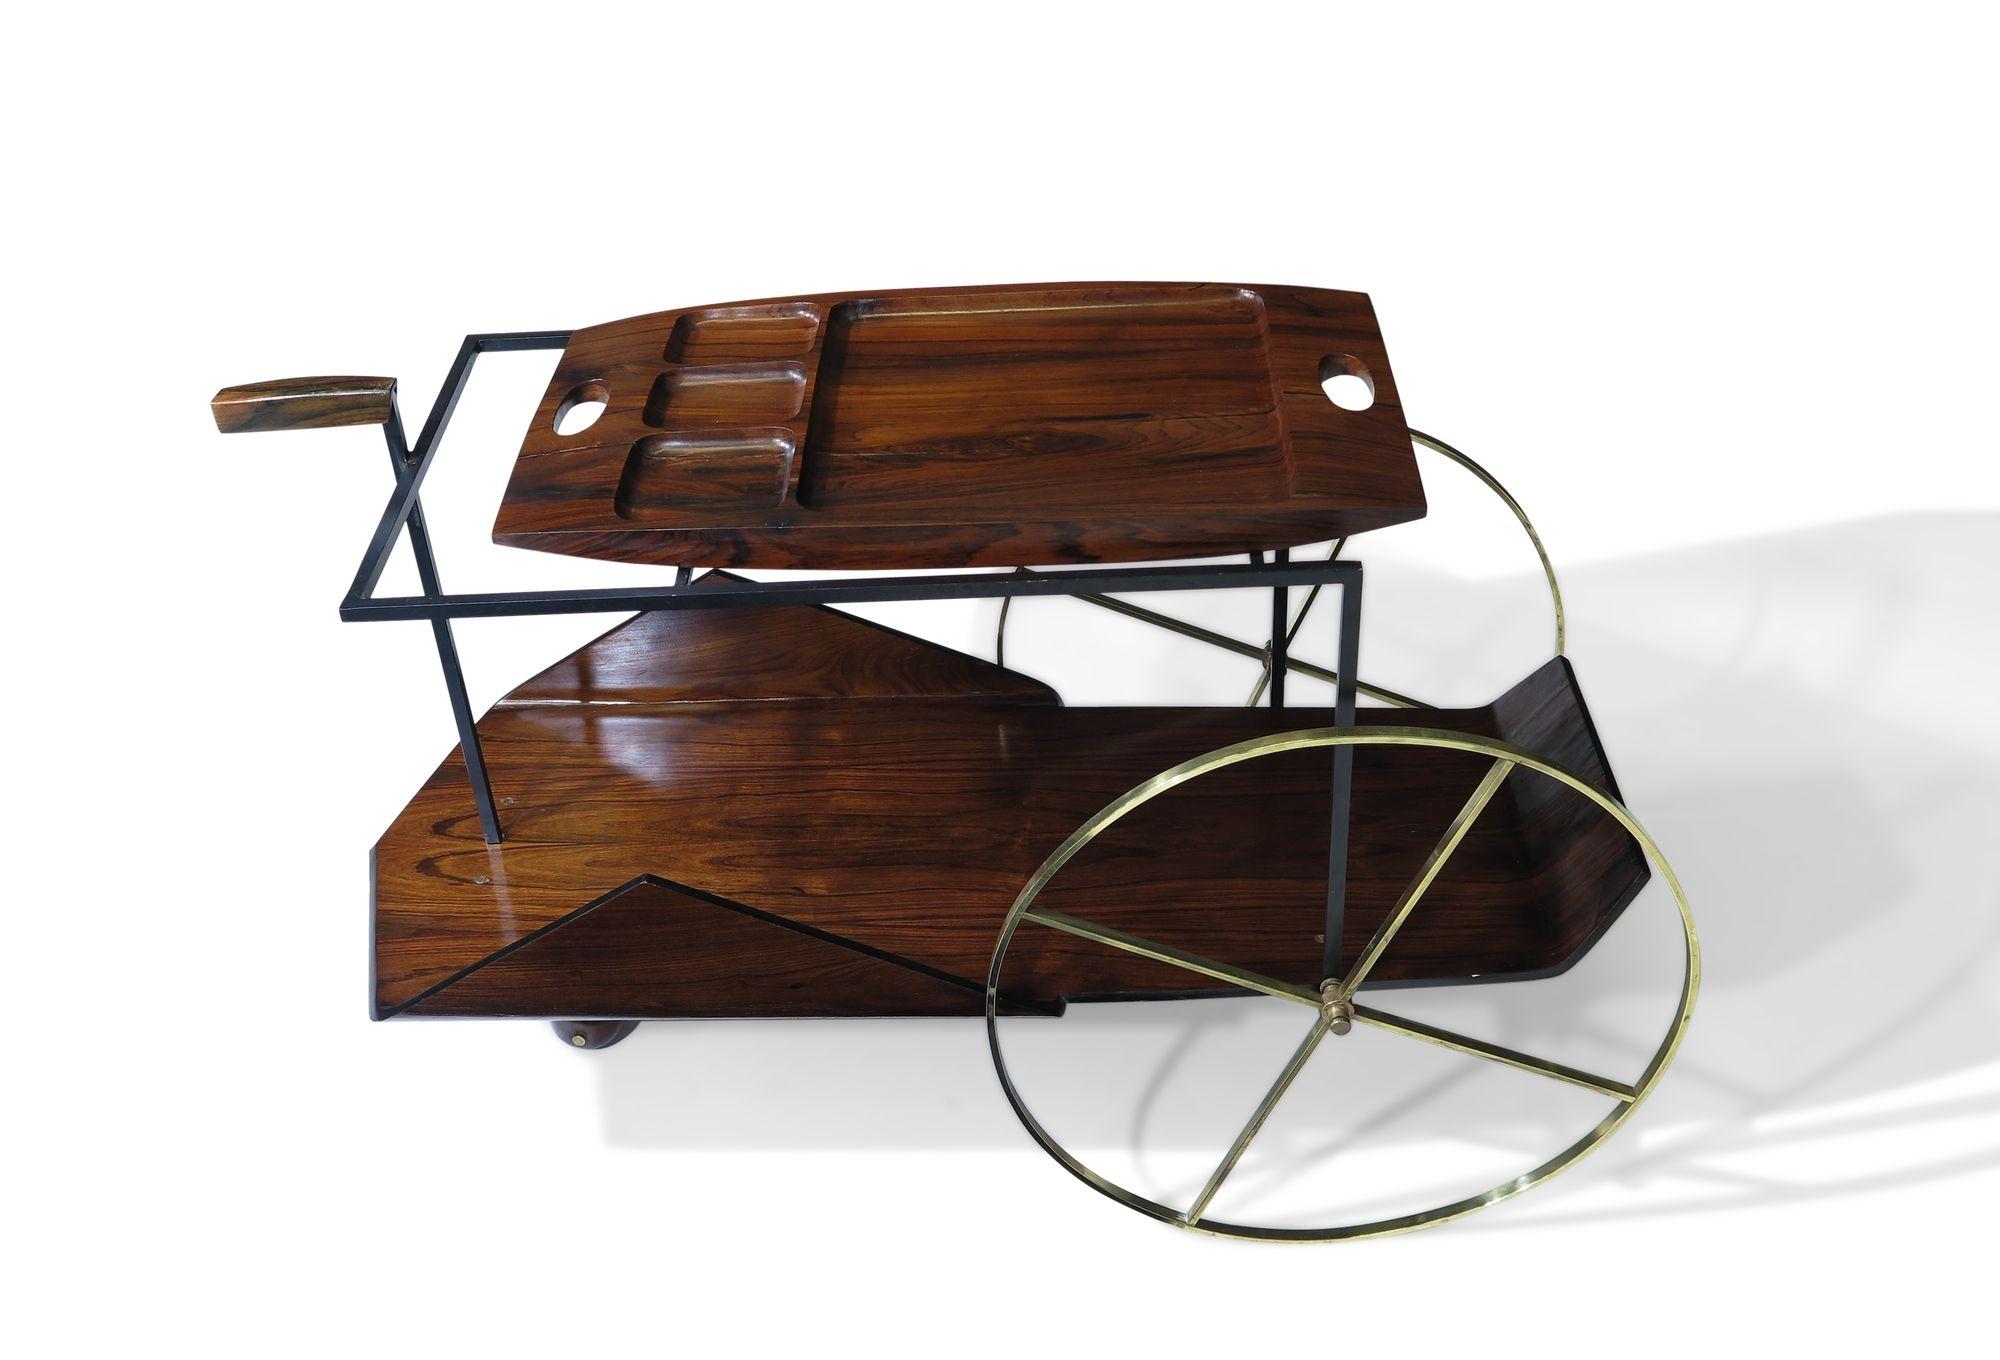 Jorge Zalszupin Carrinho de Chá bar cart crafted of Jacaranda Rosewood with solid brass wheels and carved removable tray. 
 
Measurements 19.66''W x 44.25